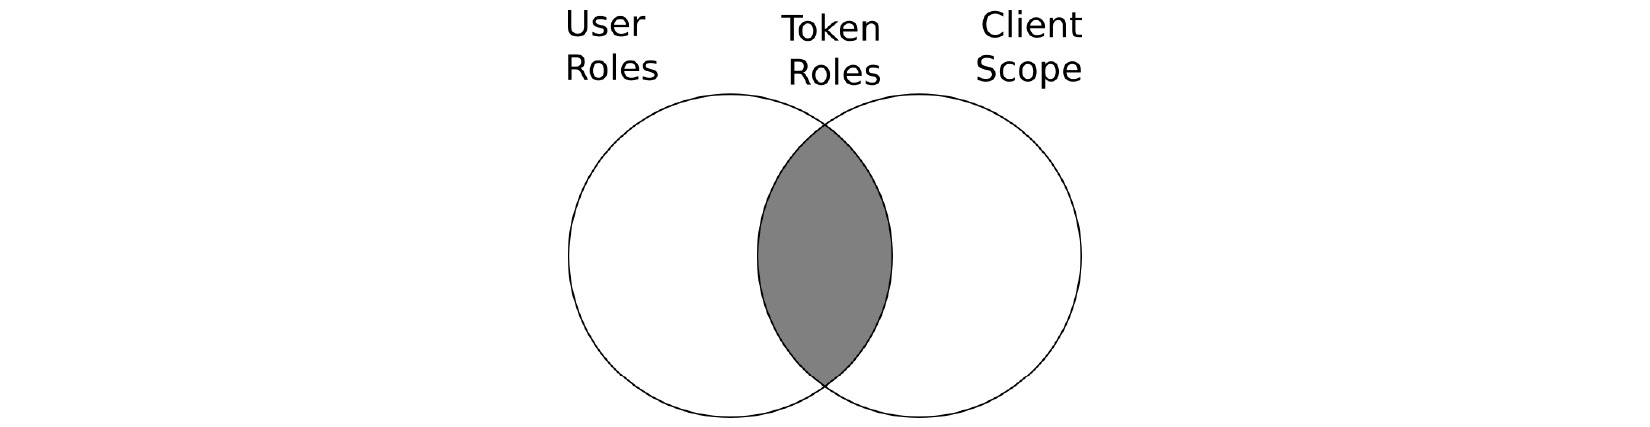 Figure 5.8 – Roles included in tokens
